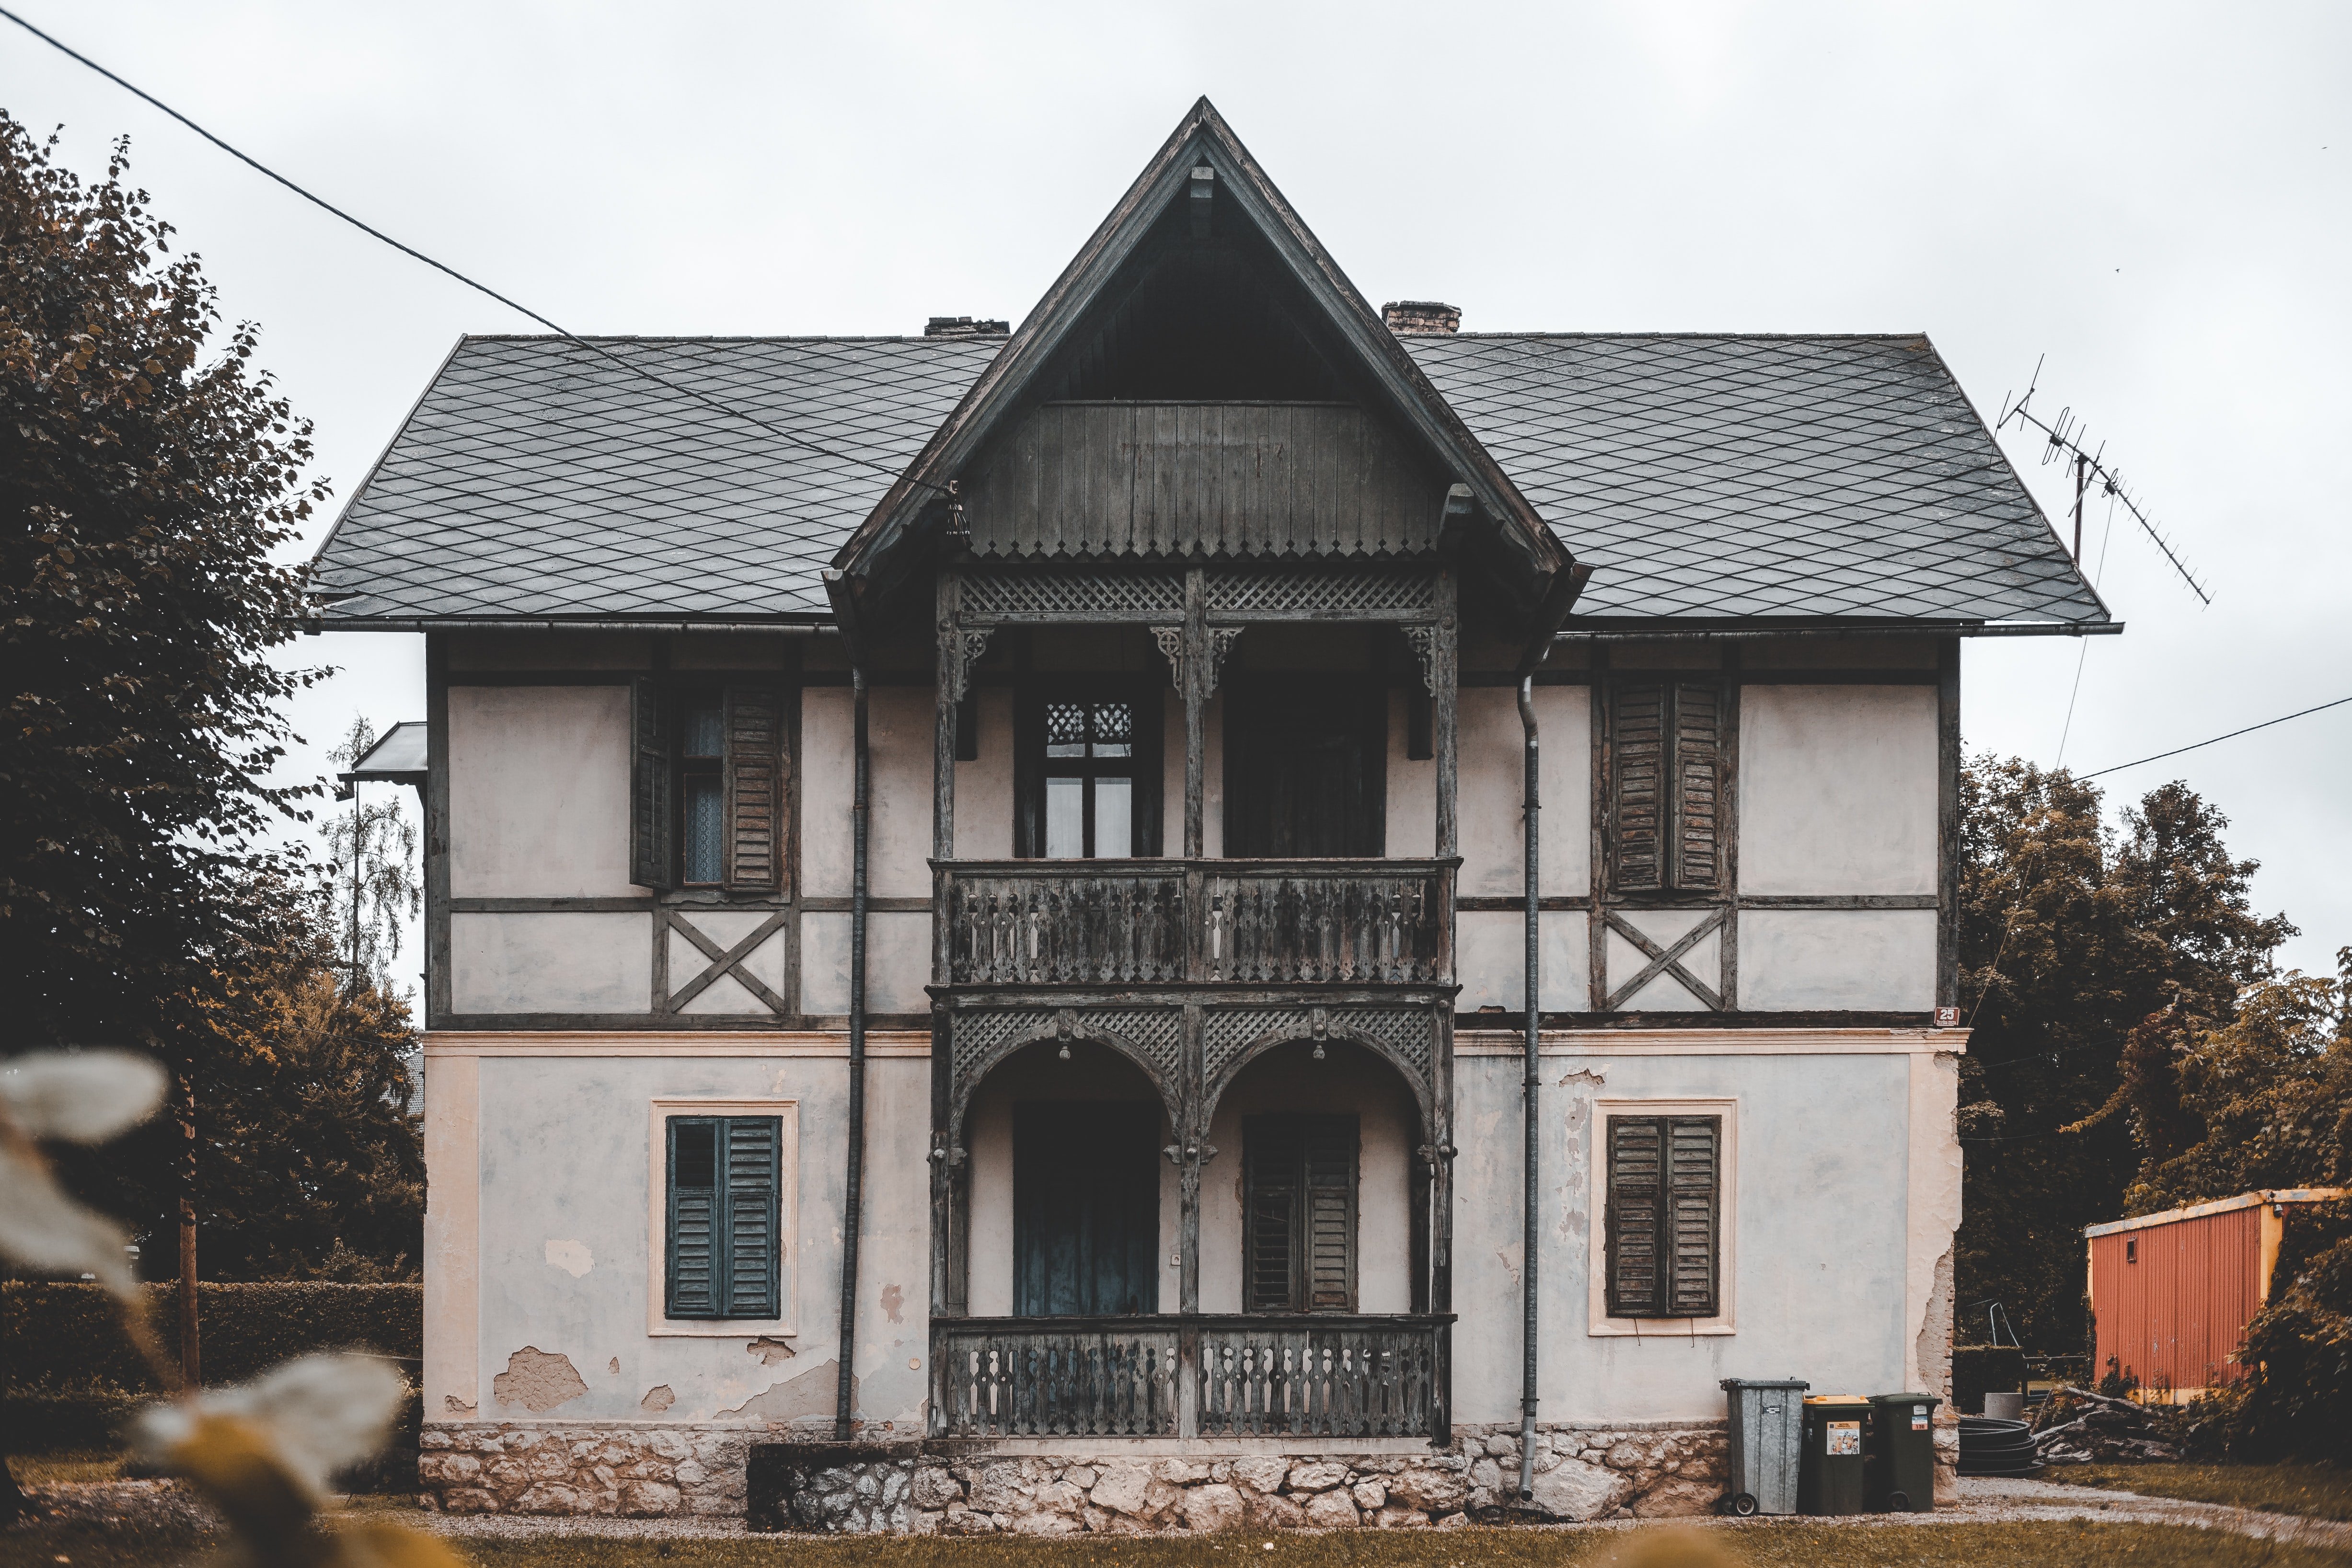 The girl stopped at an old, abandoned house | Photo: Unsplash